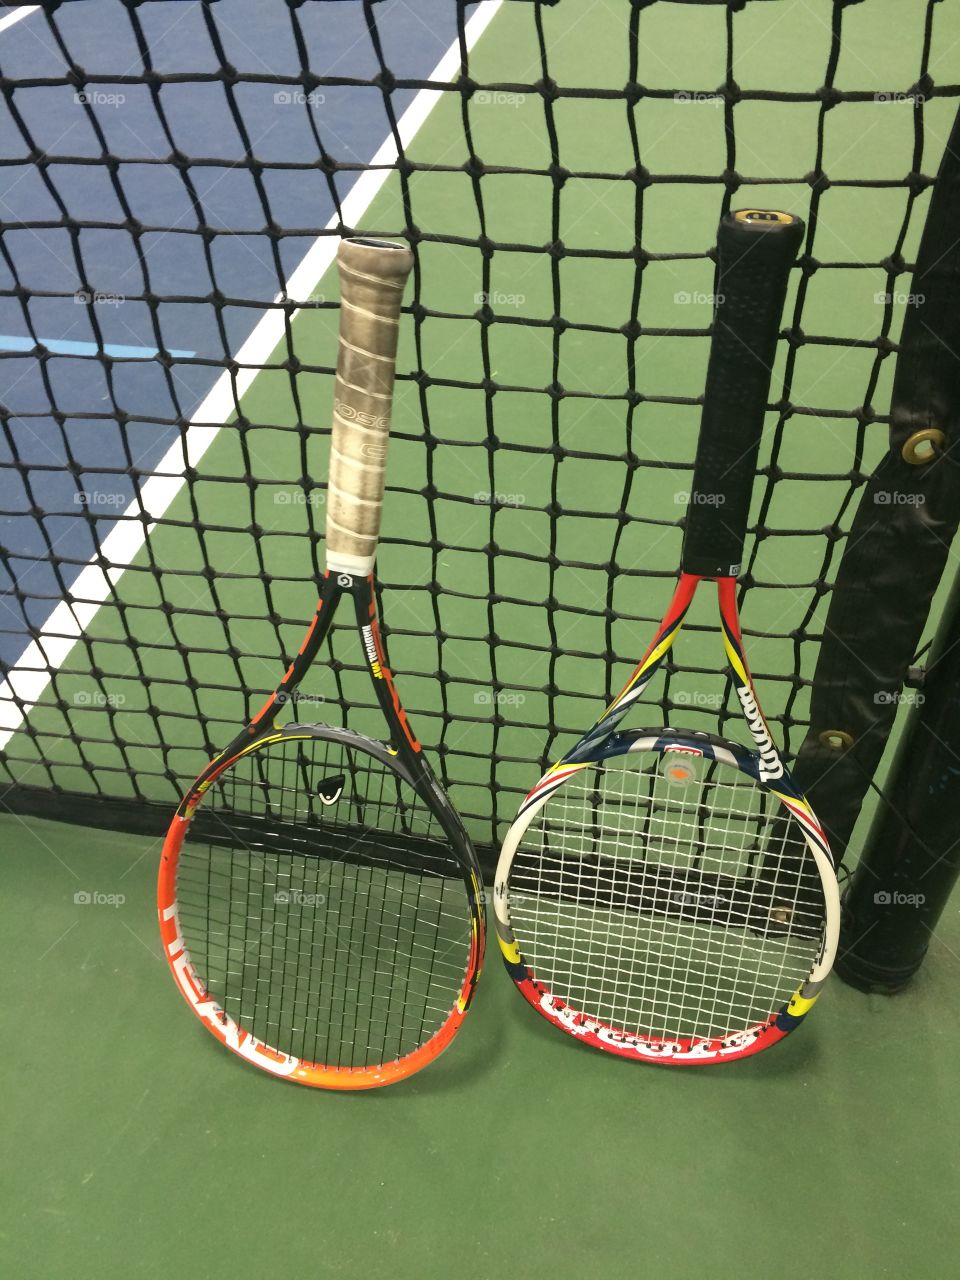 At rest. Racquets